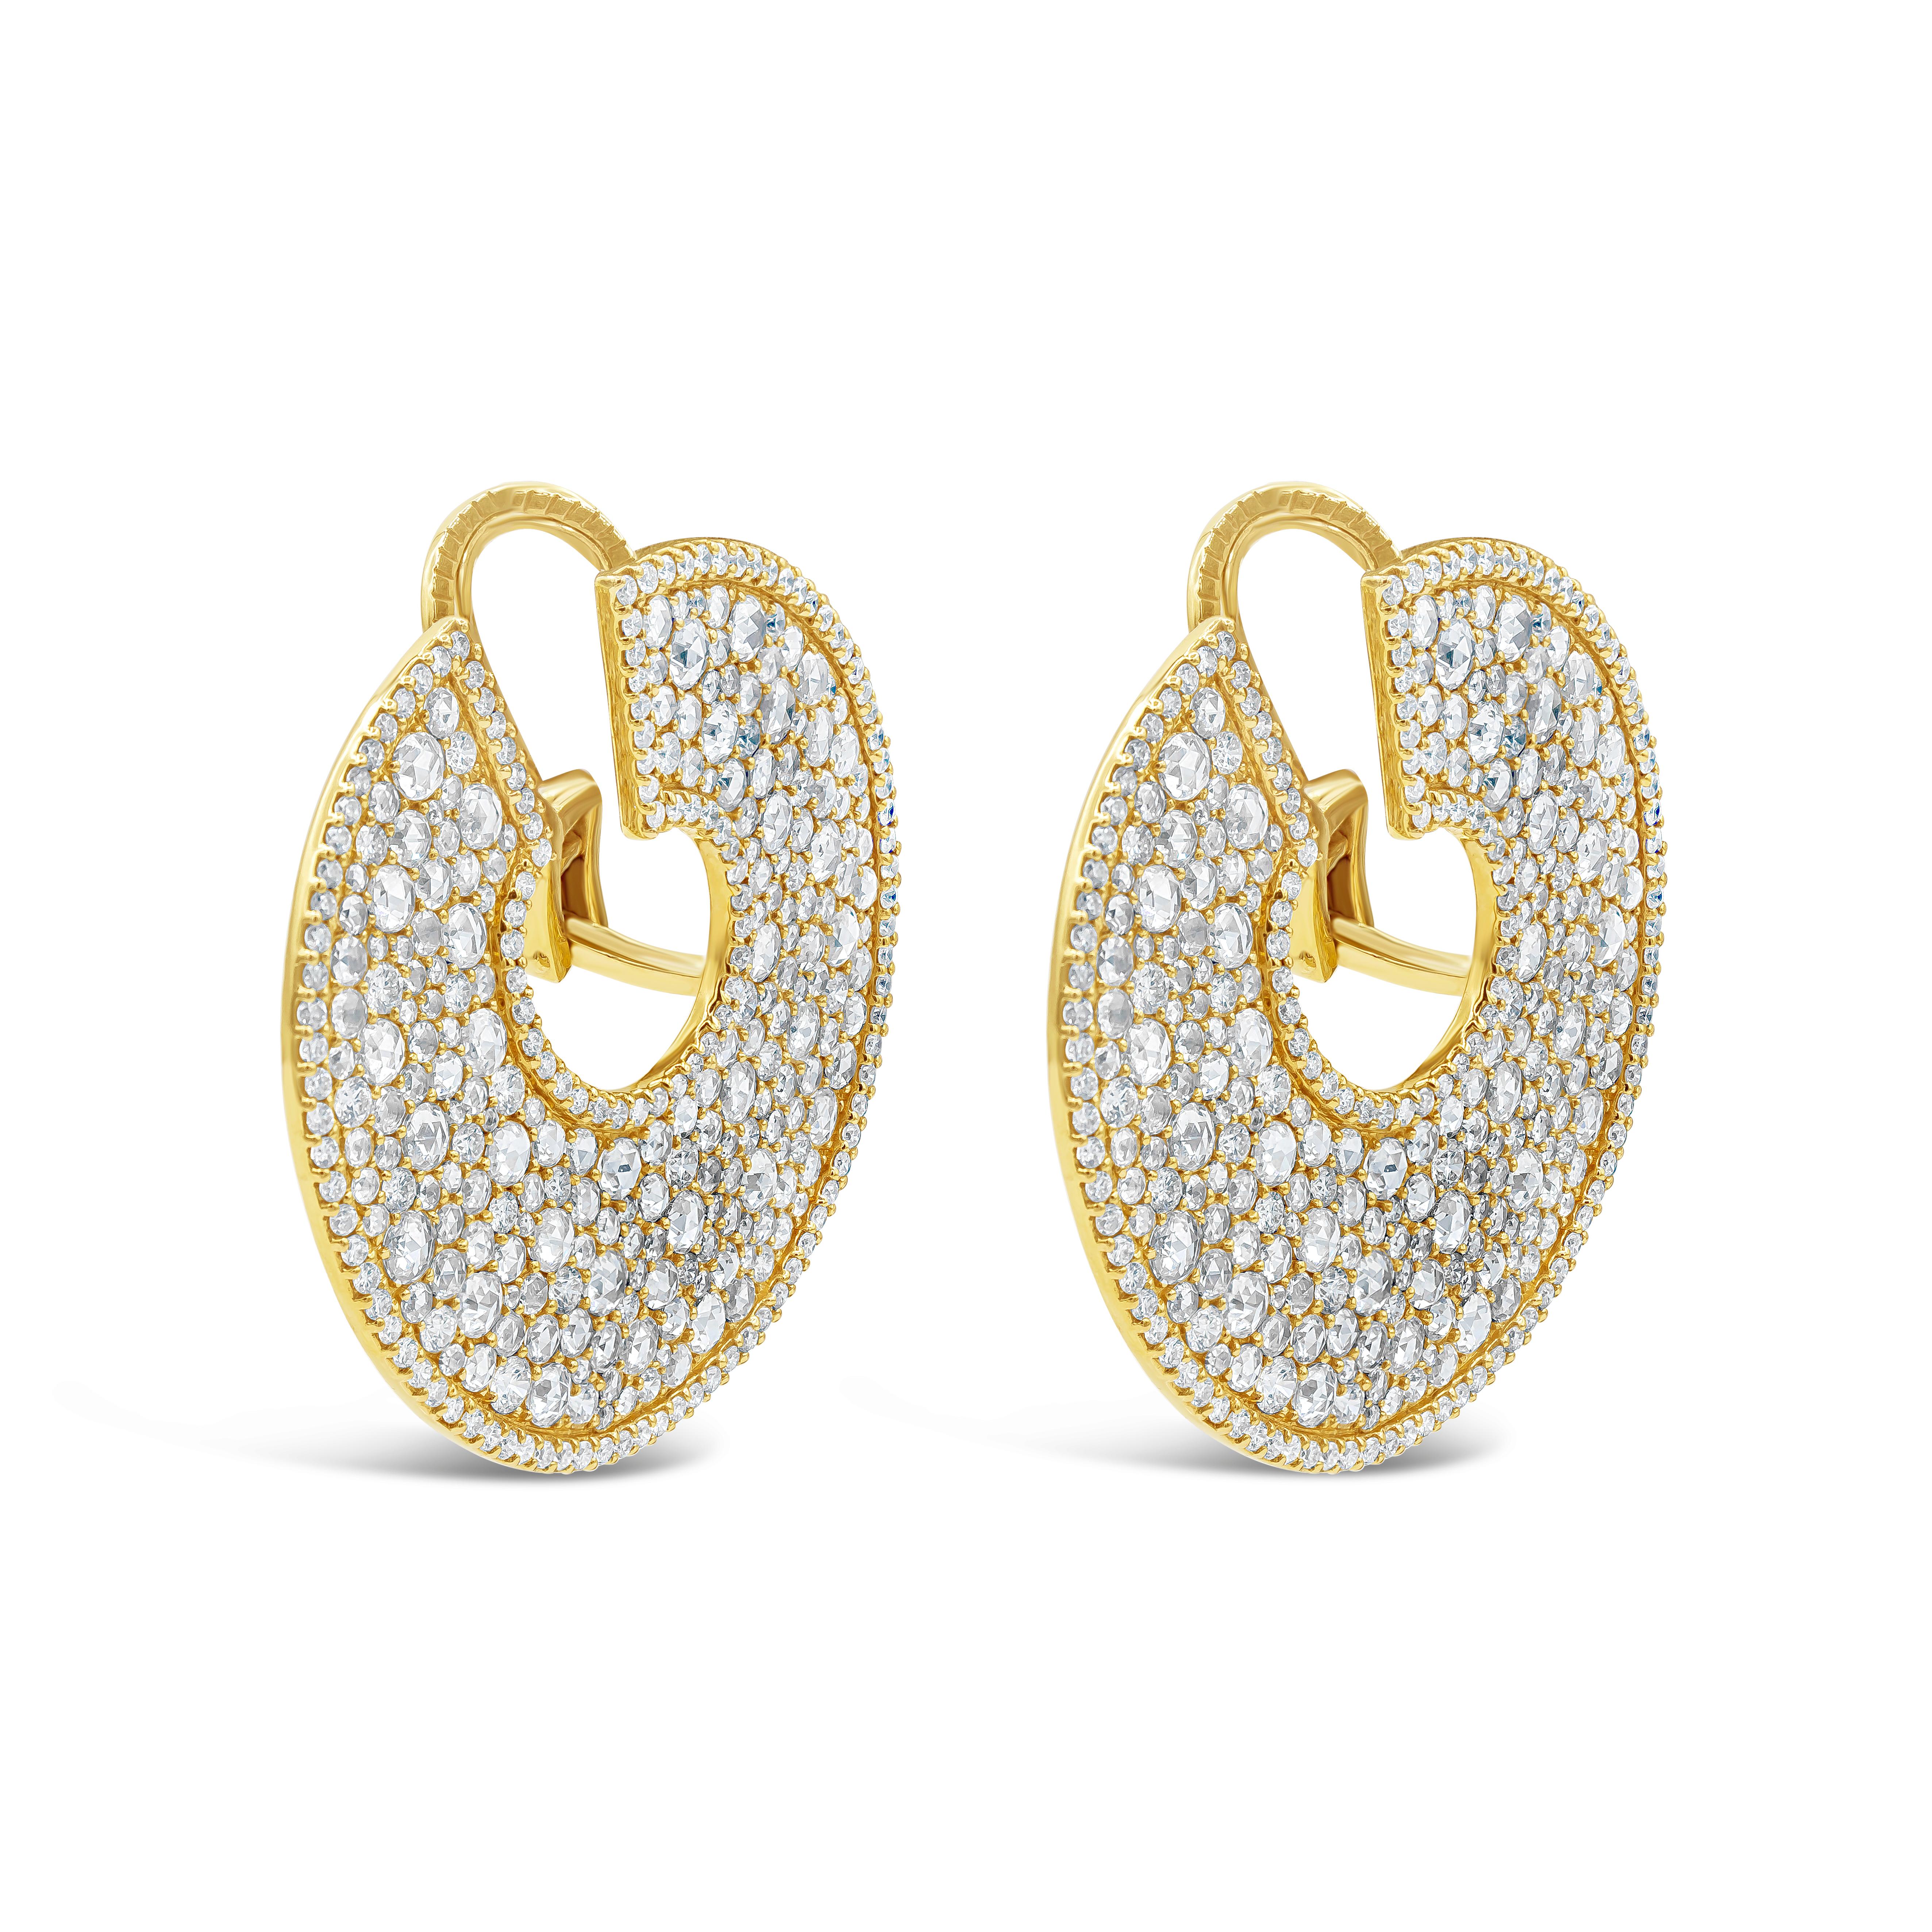 A unique and important pair of earrings showcasing 9.62 carats total of rose cut diamonds set in chic circular design, accented with round brilliant diamonds. Edged with more round diamonds in a polished 18K yellow gold mounting. Accent diamonds